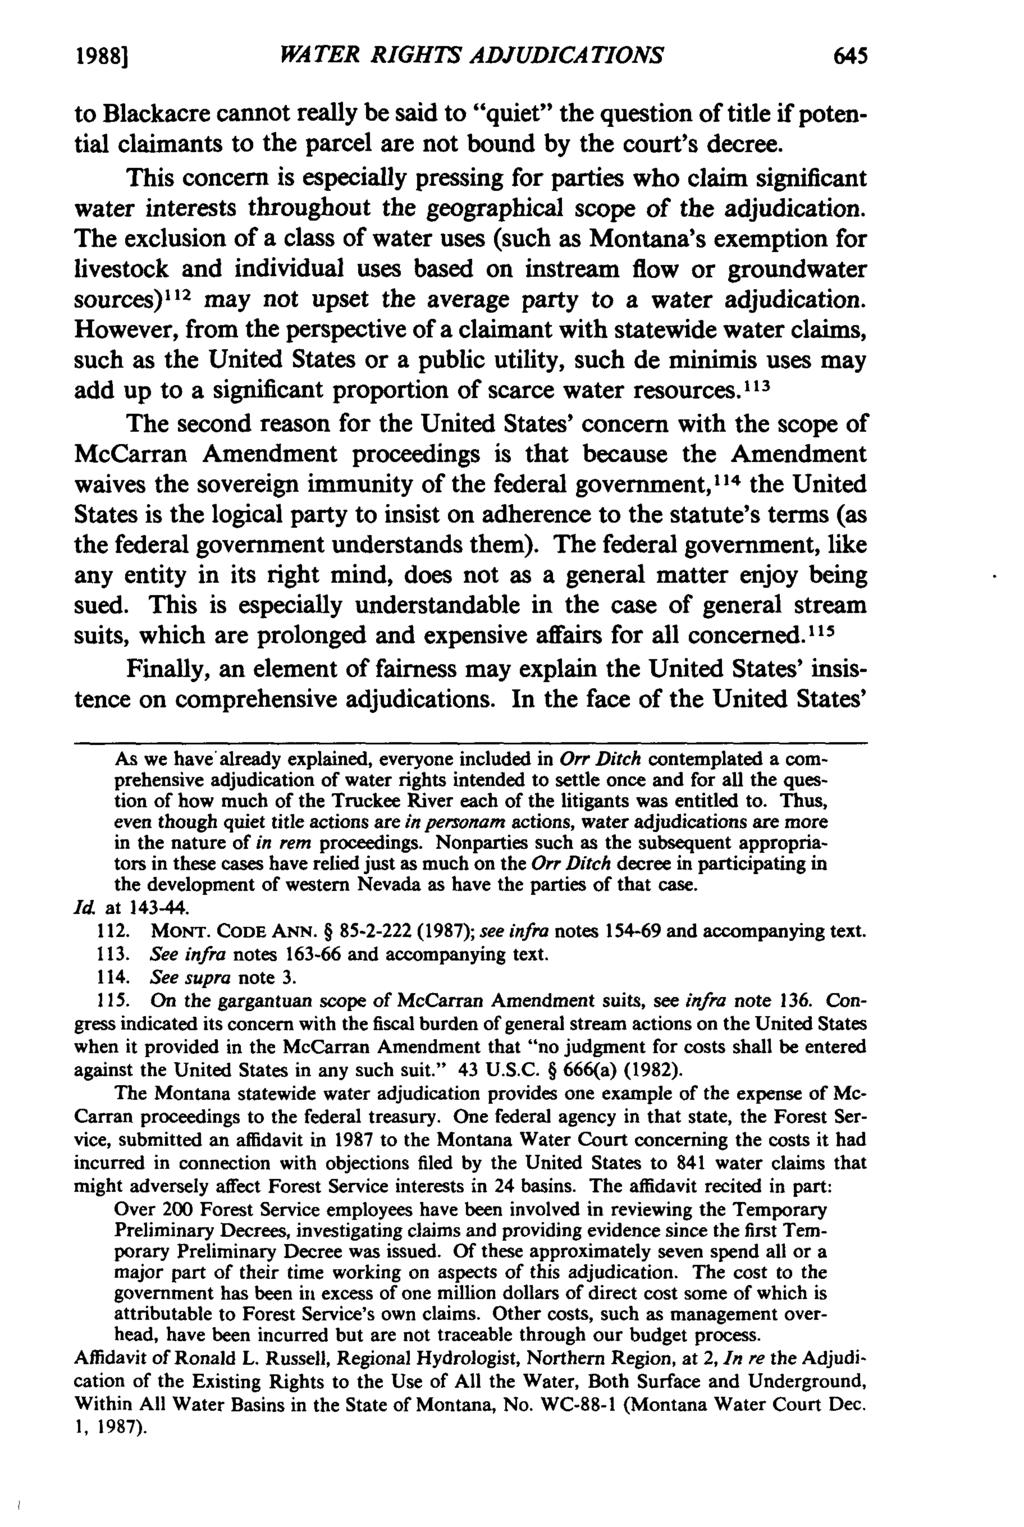 1988] WATER RIGHTS ADJUDICATIONS to Blackacre cannot really be said to "quiet" the question of title if potential claimants to the parcel are not bound by the court's decree.